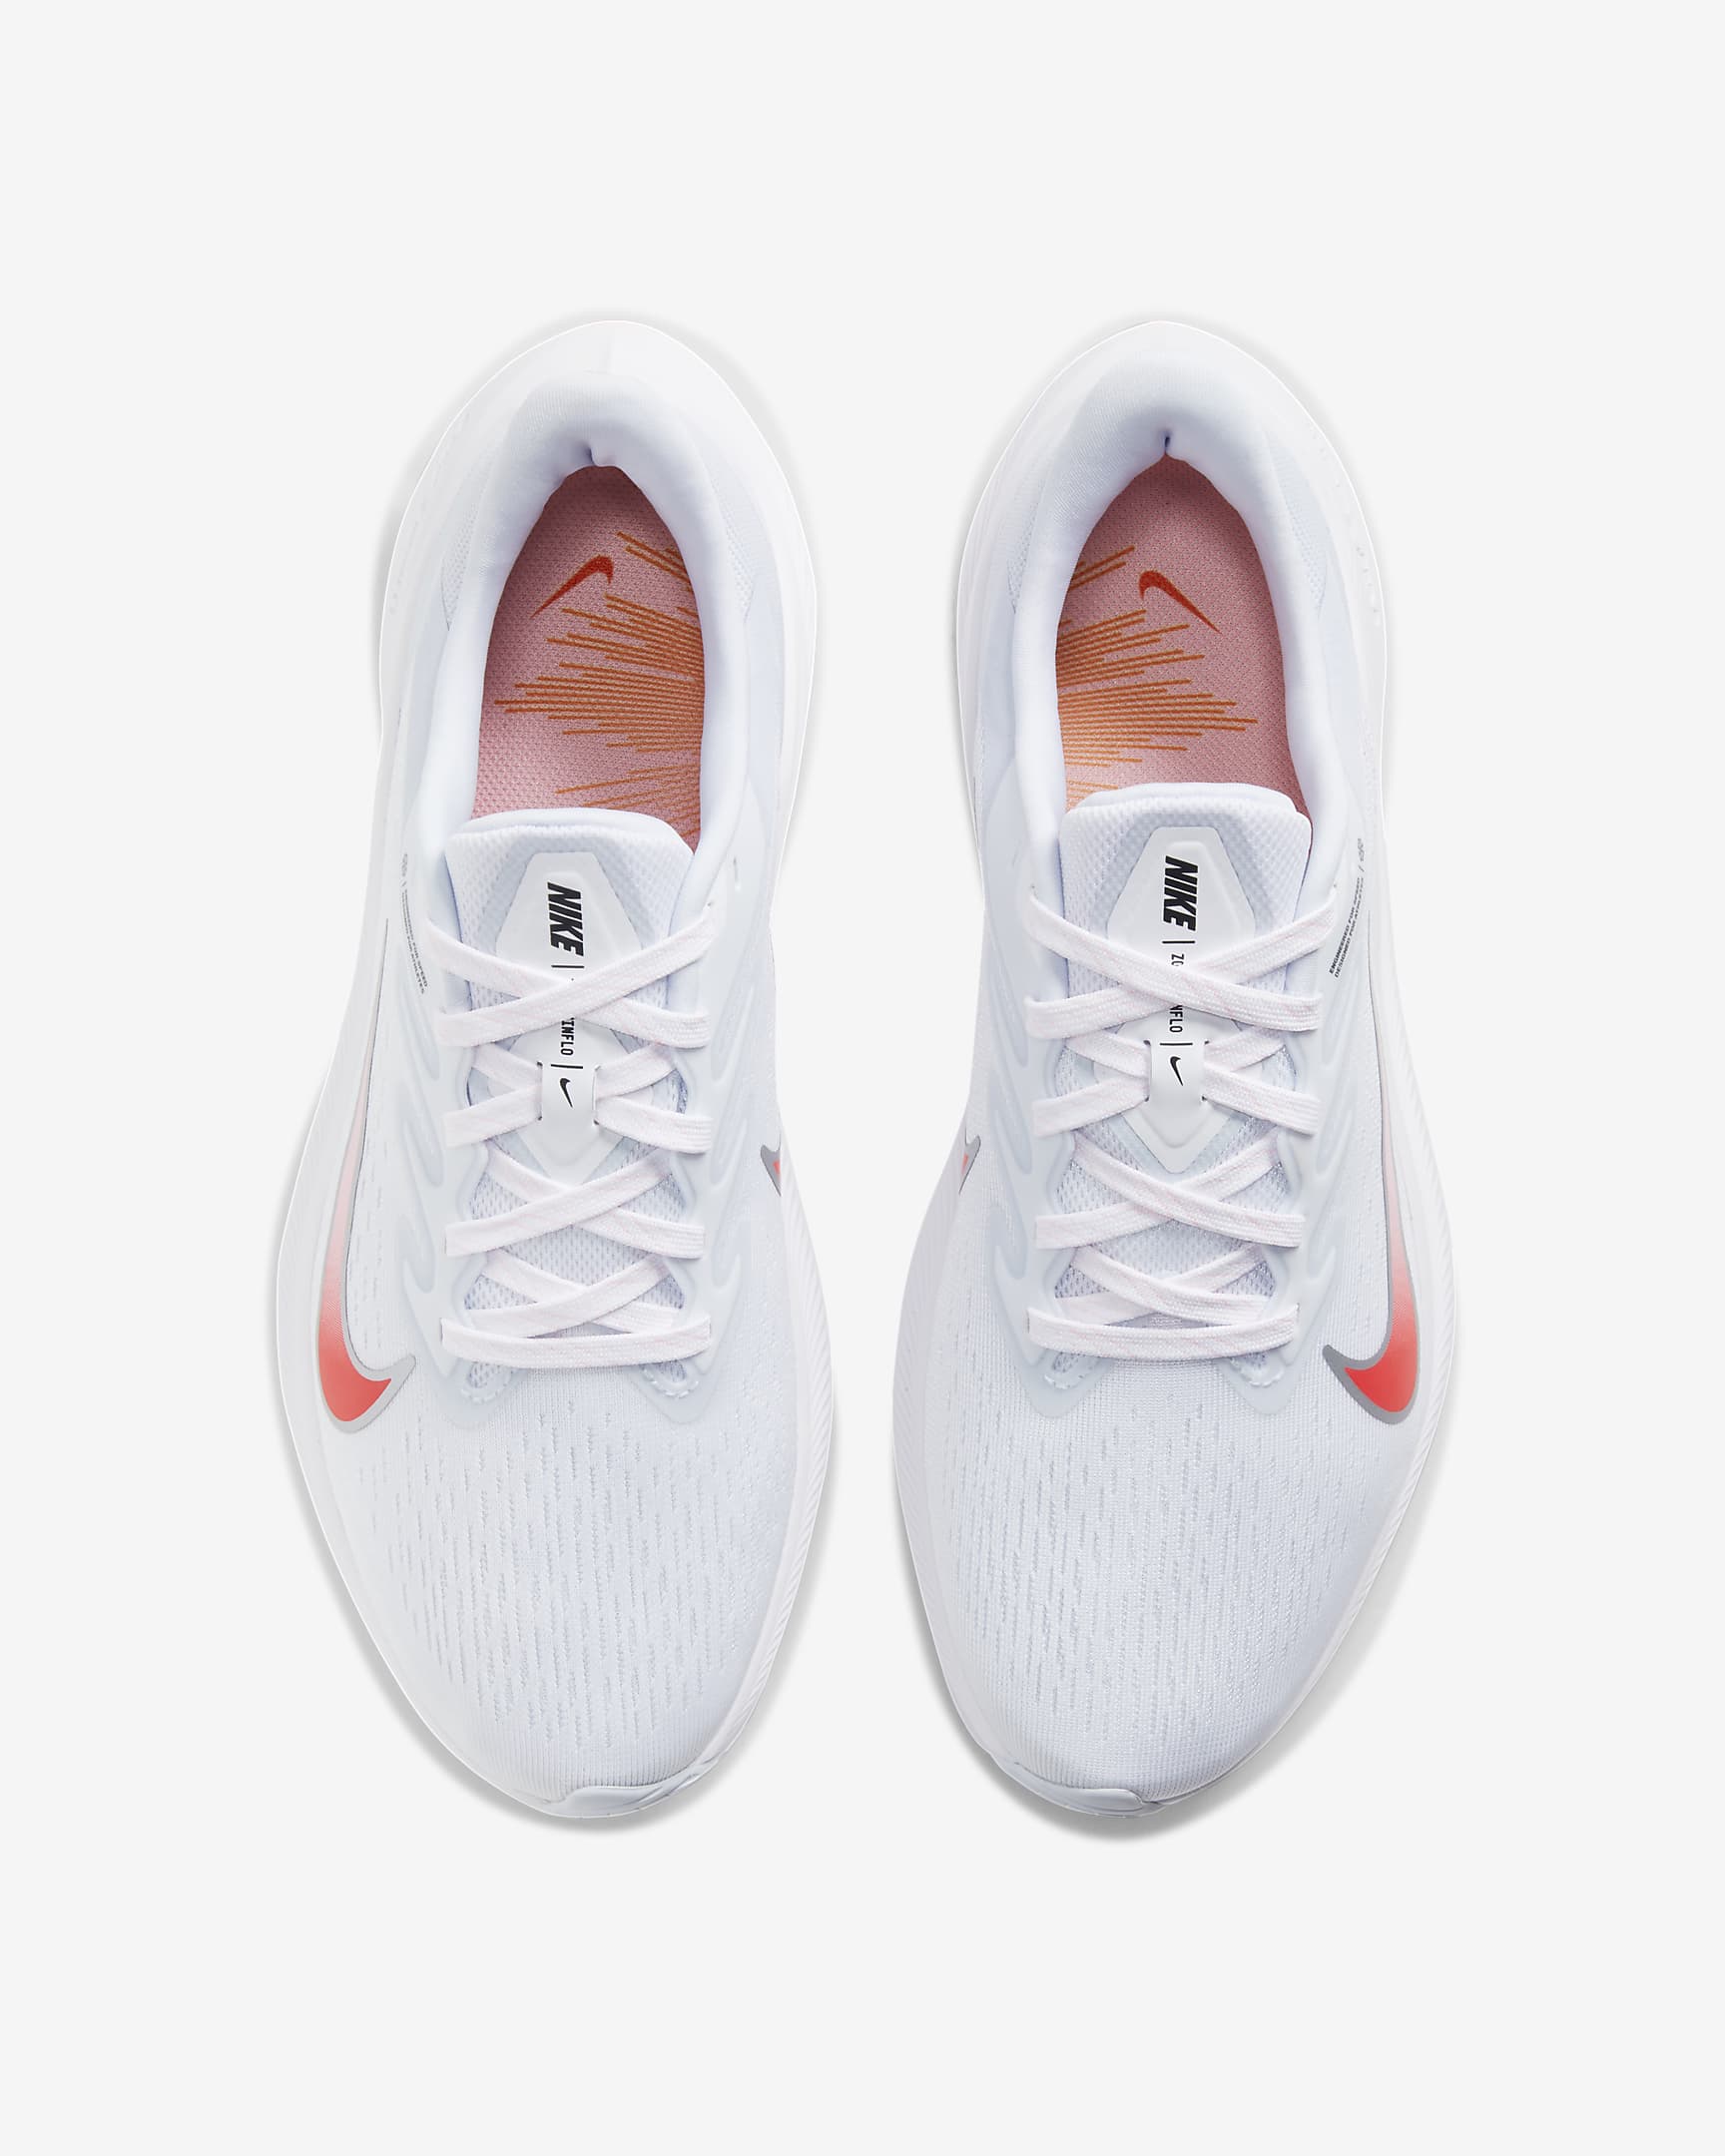 Nike Air Zoom Winflo 7 Women's Road Running Shoes. Nike AT